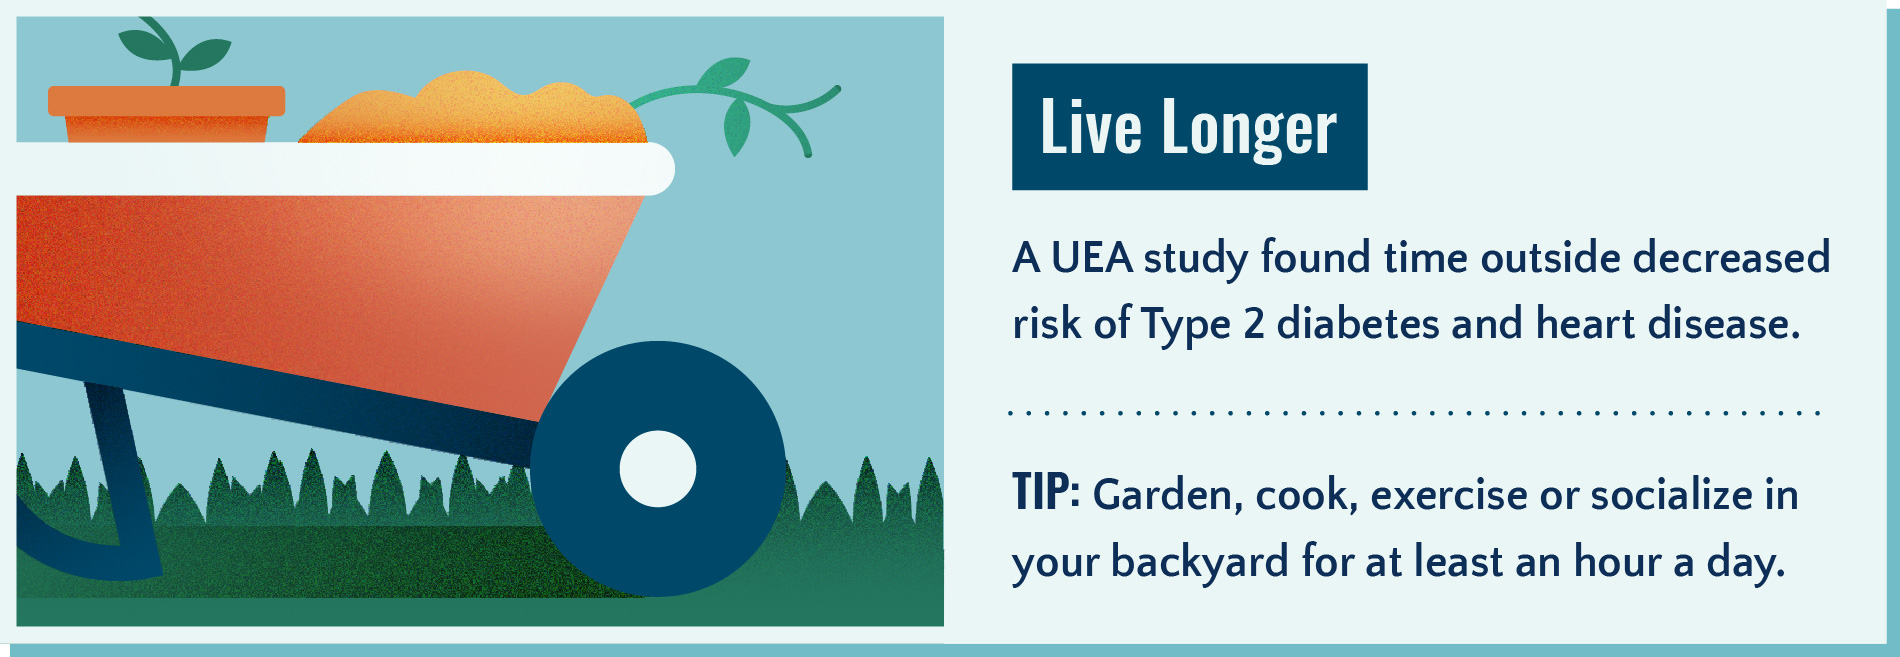 Spending time outside can help you live longer.